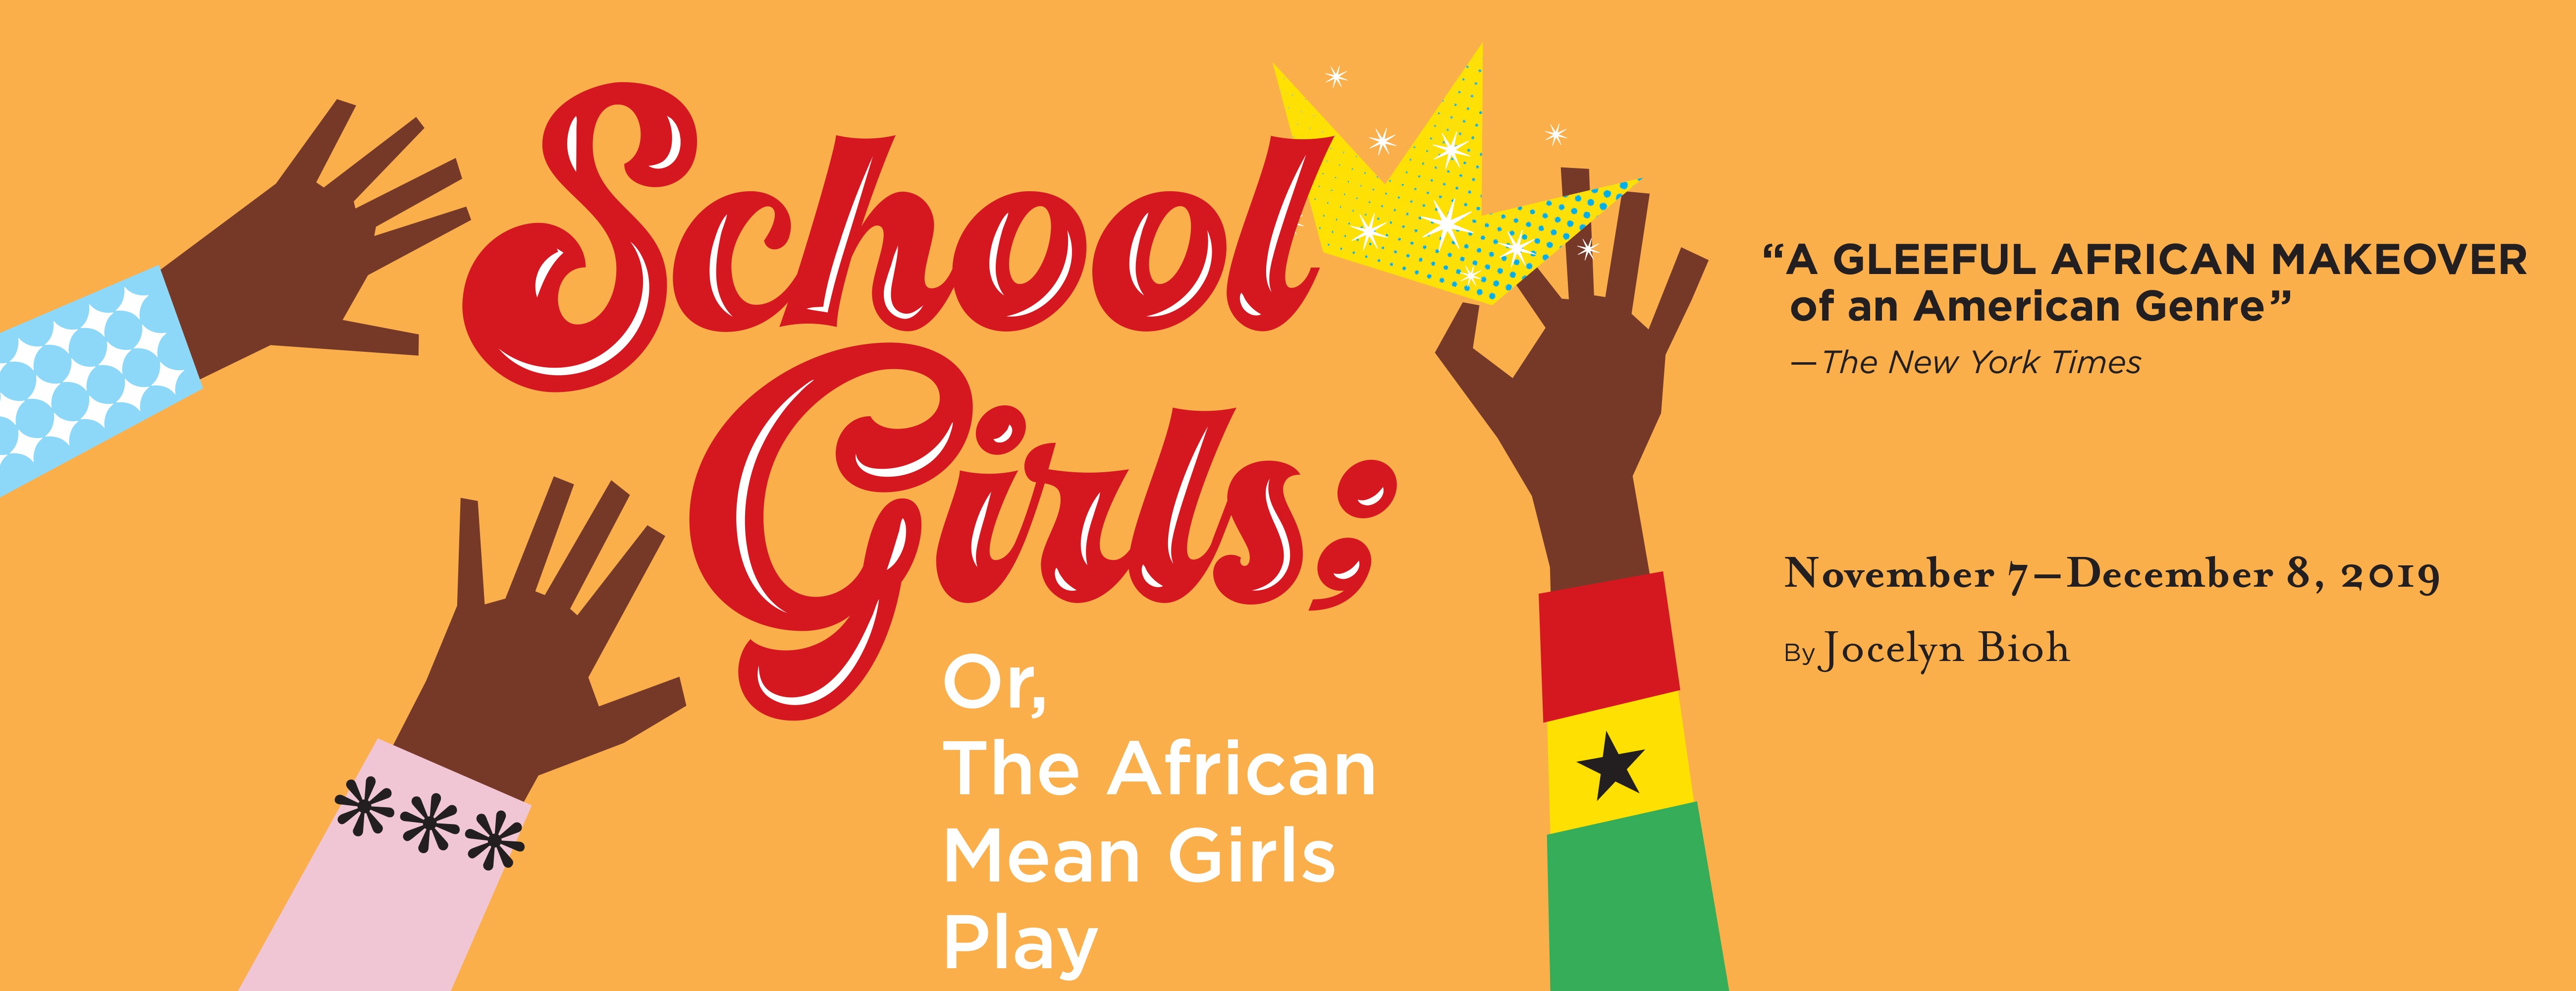 School Girls Or The African Mean Girls Play Pittsburgh Official Ticket Source O Reilly Theater Thu Nov 7 Sun Dec 8 19 Pittsburgh Public Theater